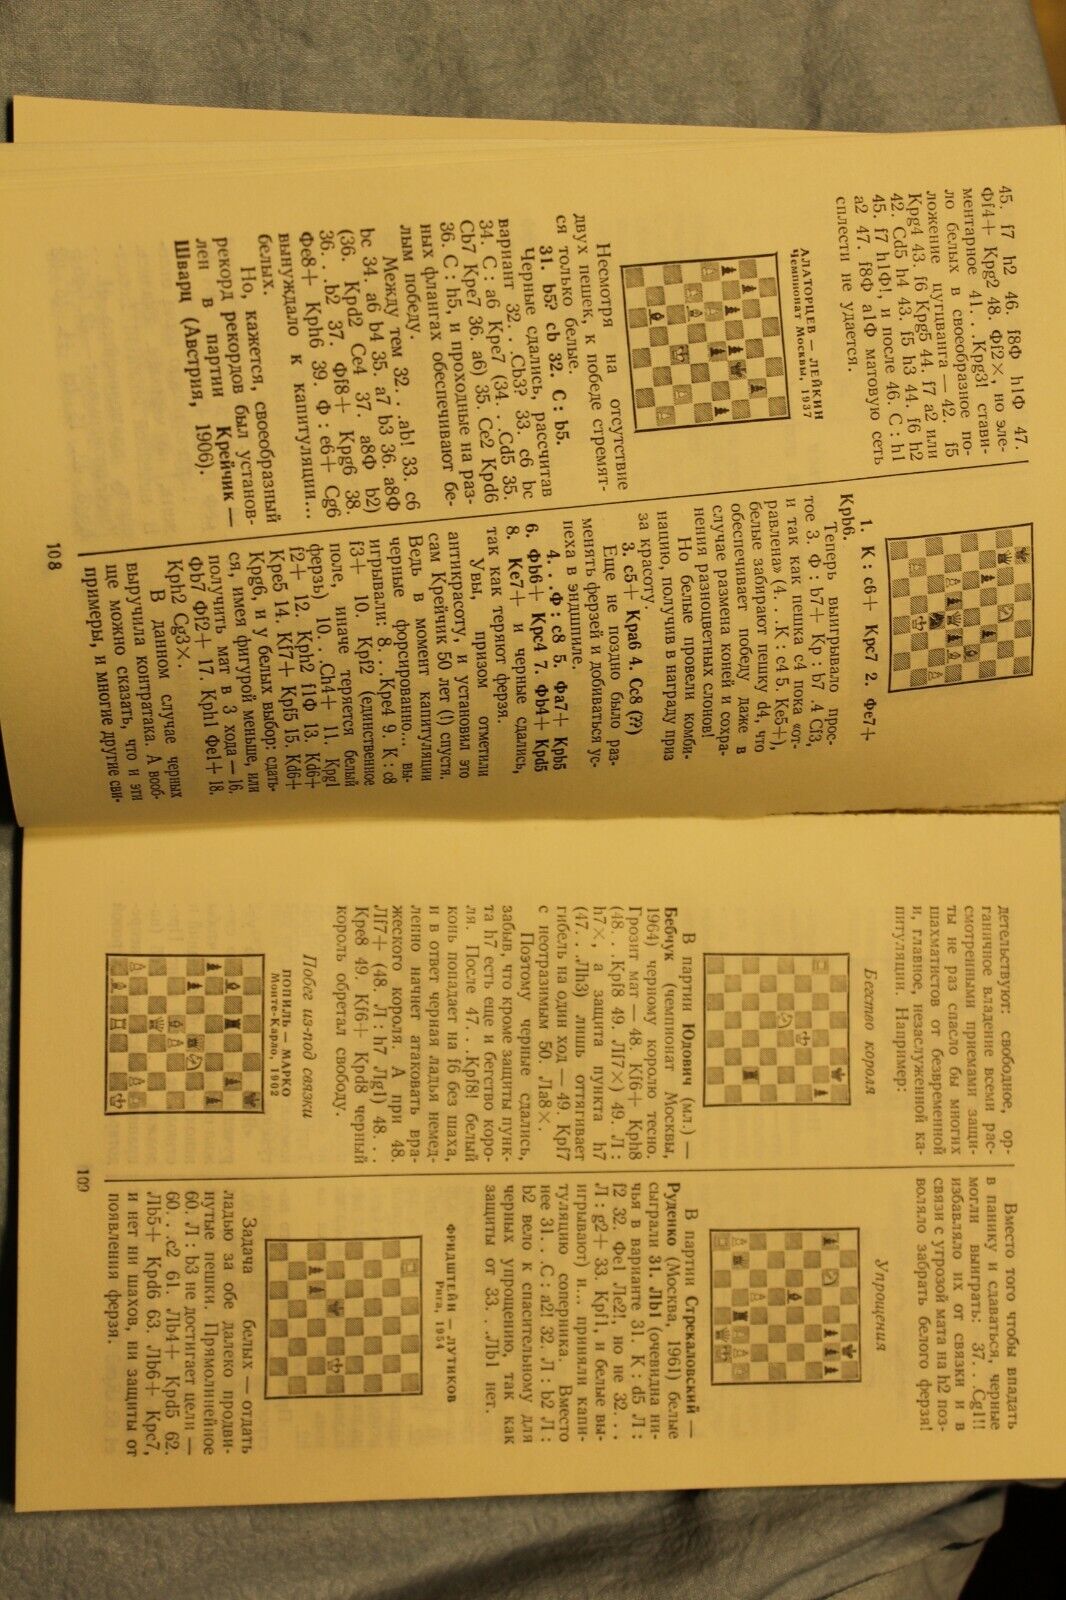 11116.Chess book: Signed by Y. Damsky, Last Chance, 1990